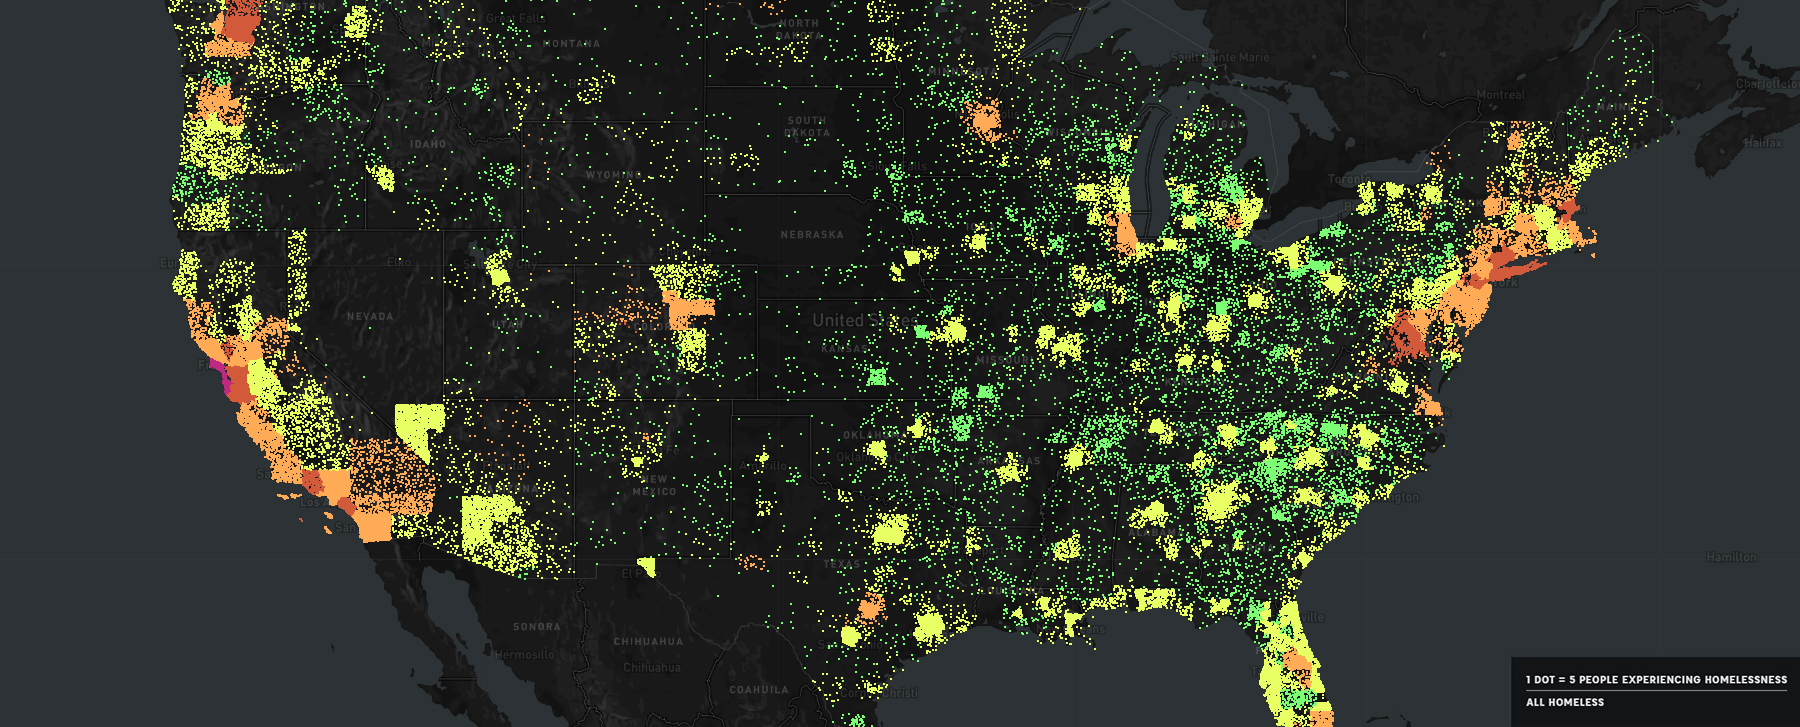 Map of United States with data clusters illuminated in different colored dots